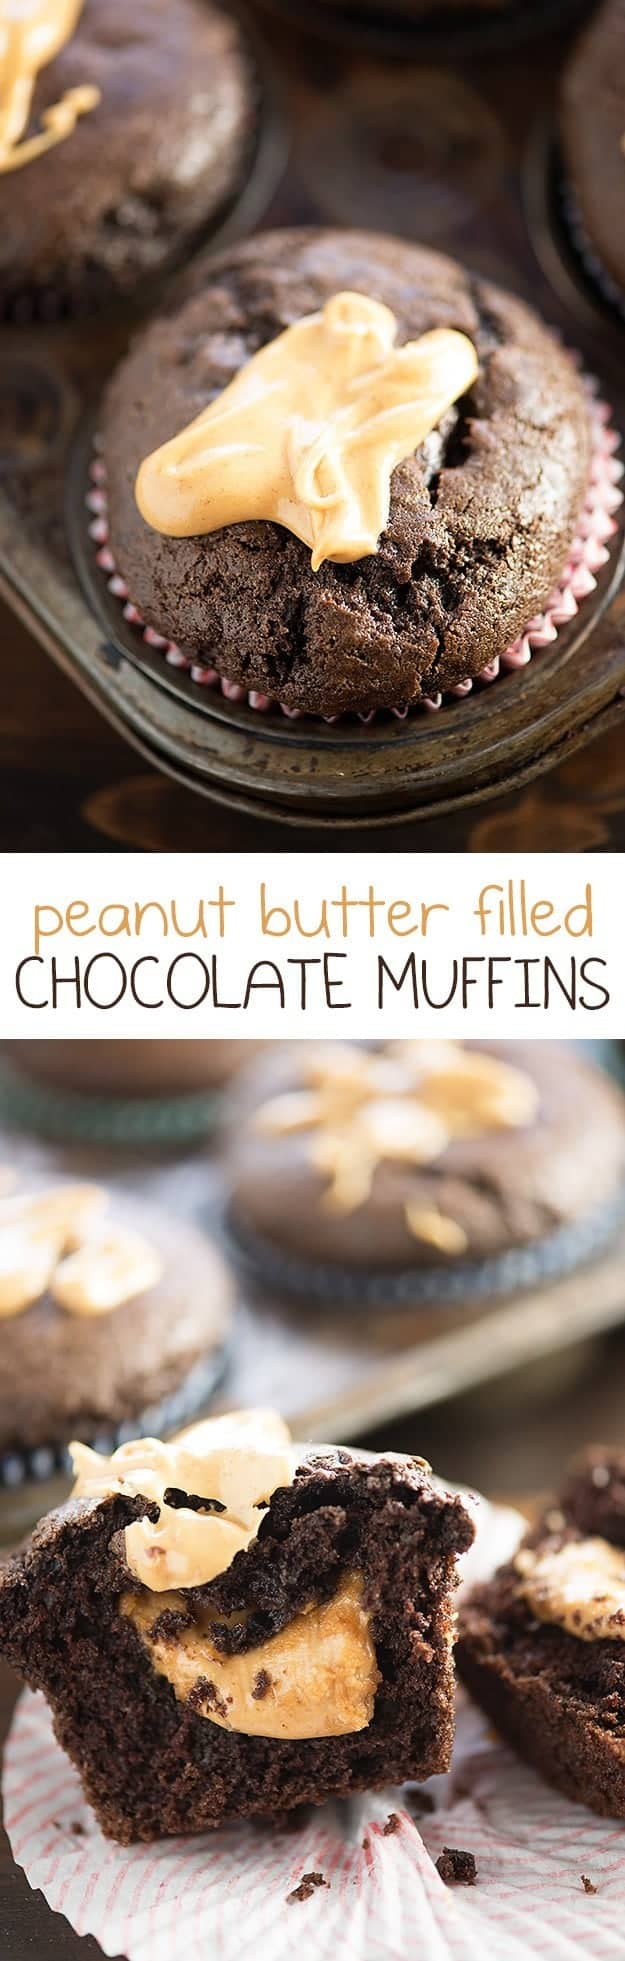 chocolate muffins filled with peanut butter